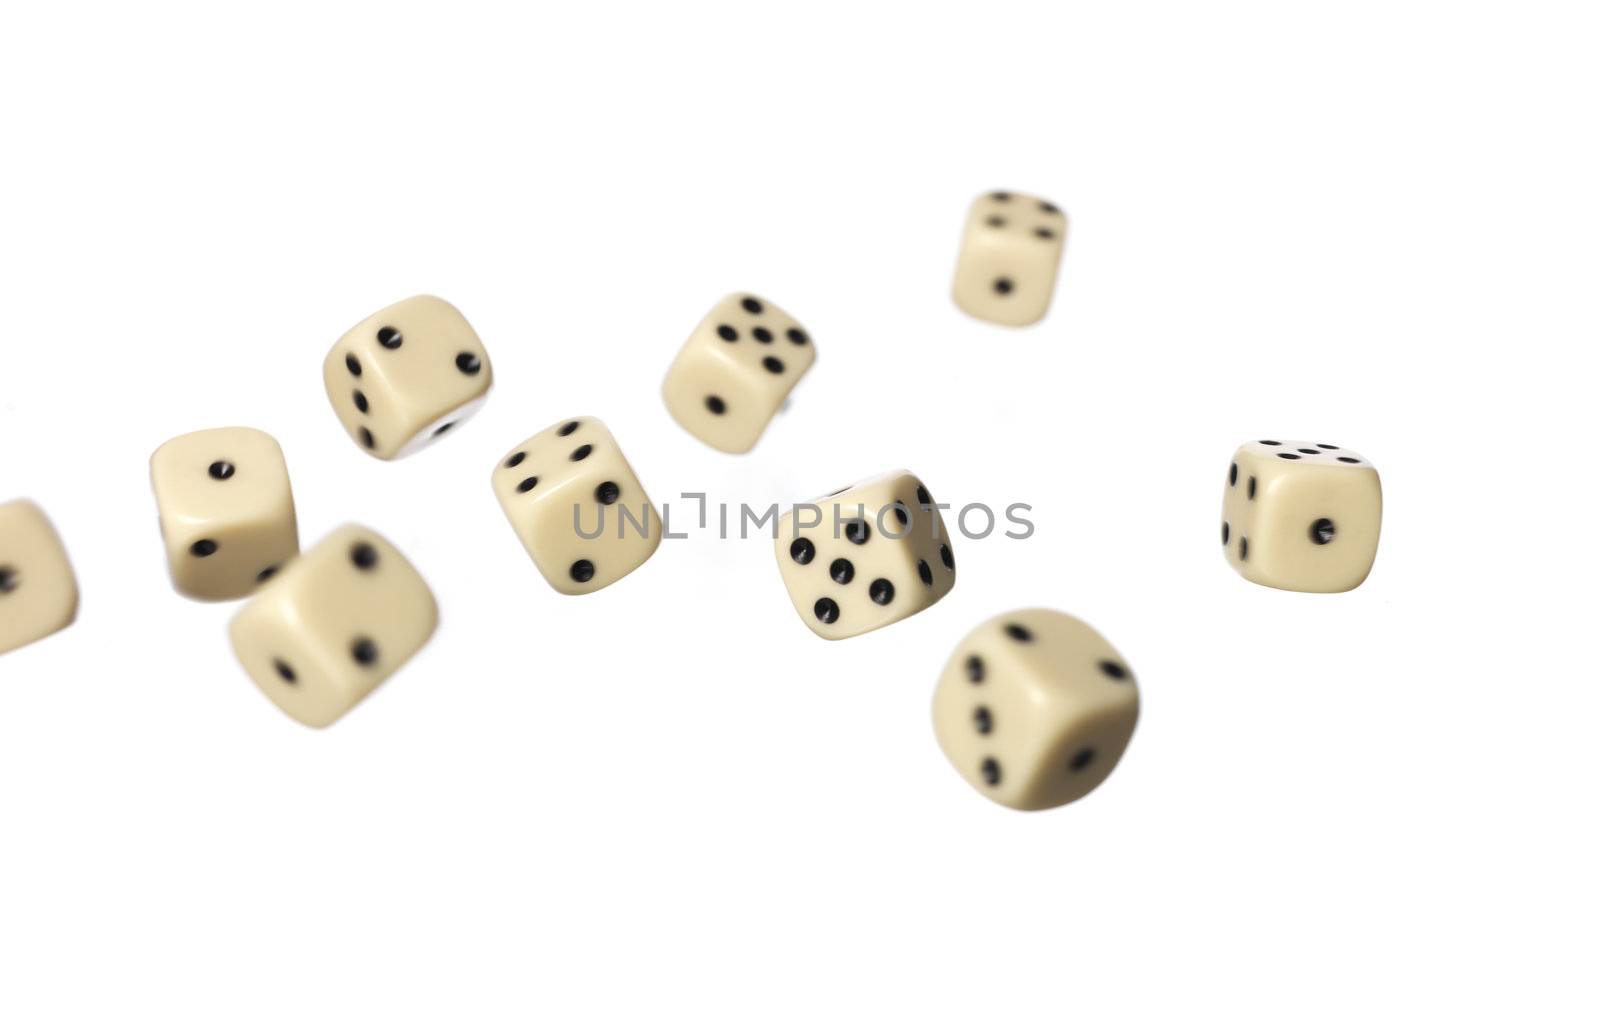 Roled dices